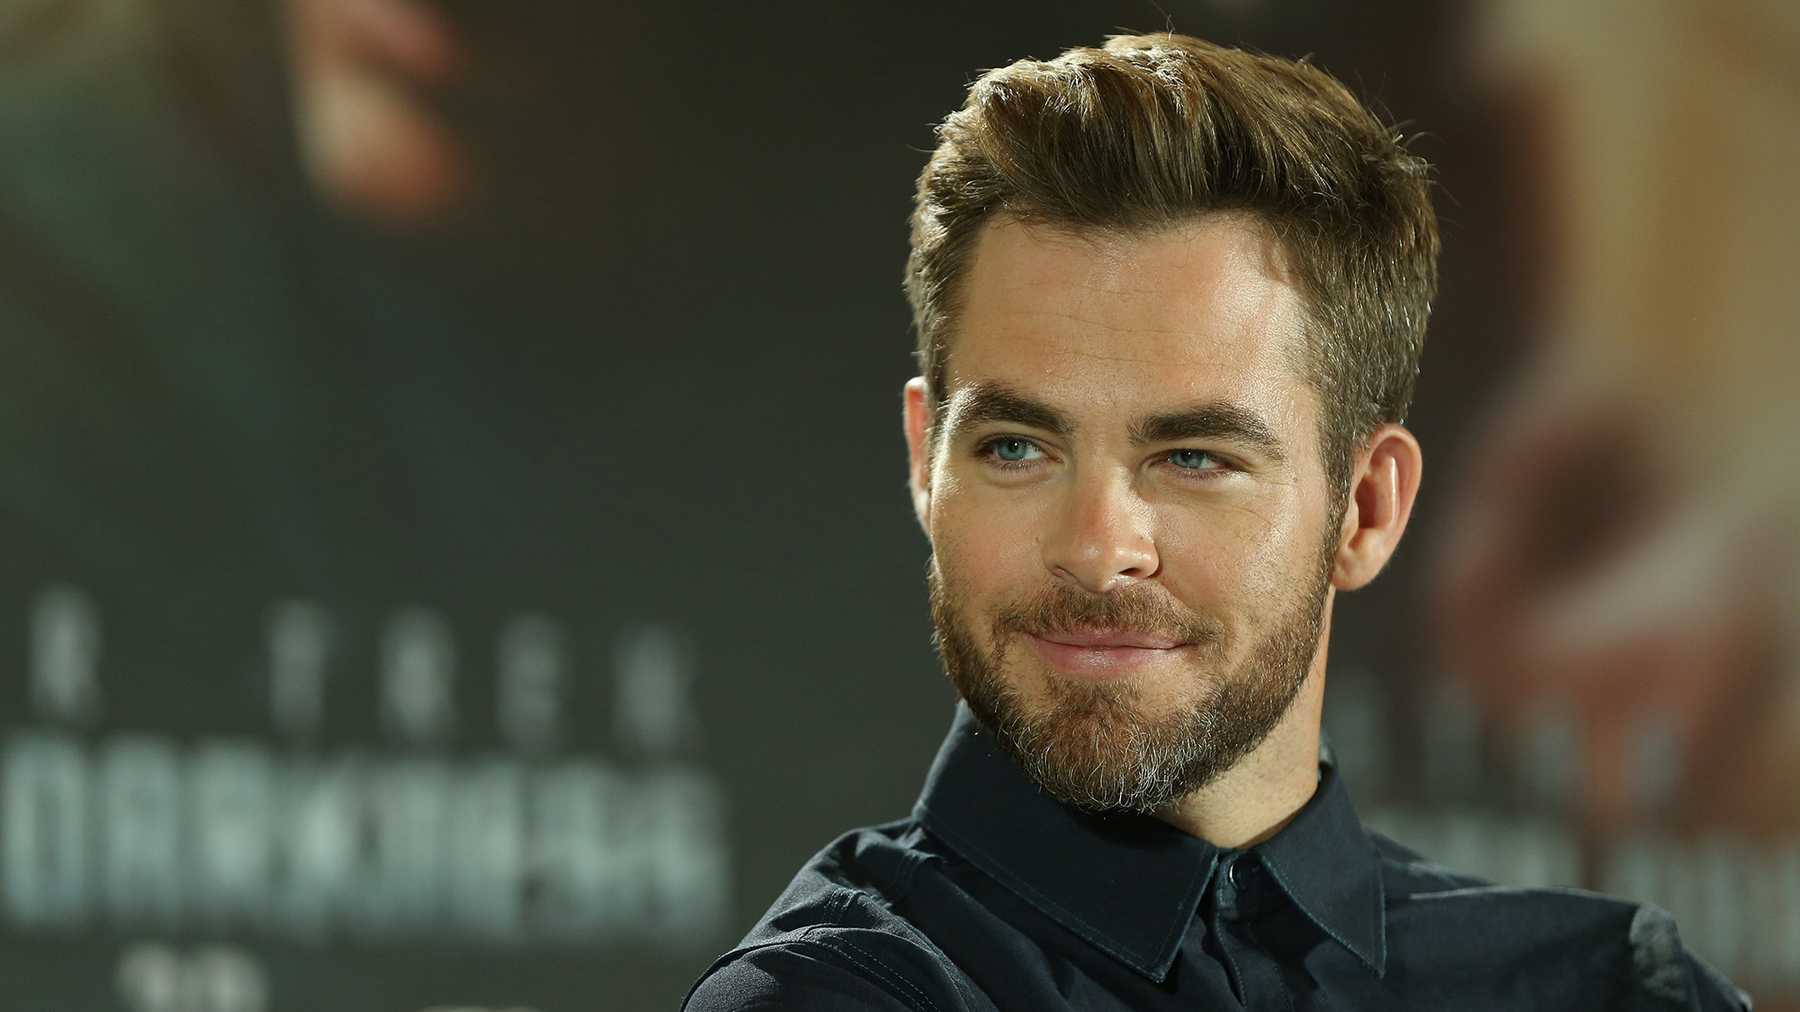 Tabletop RPG D&D is all the rage right now. Will the new 'Dungeons and Dragons' movie featuring Chris Pine truly bring the game to life?